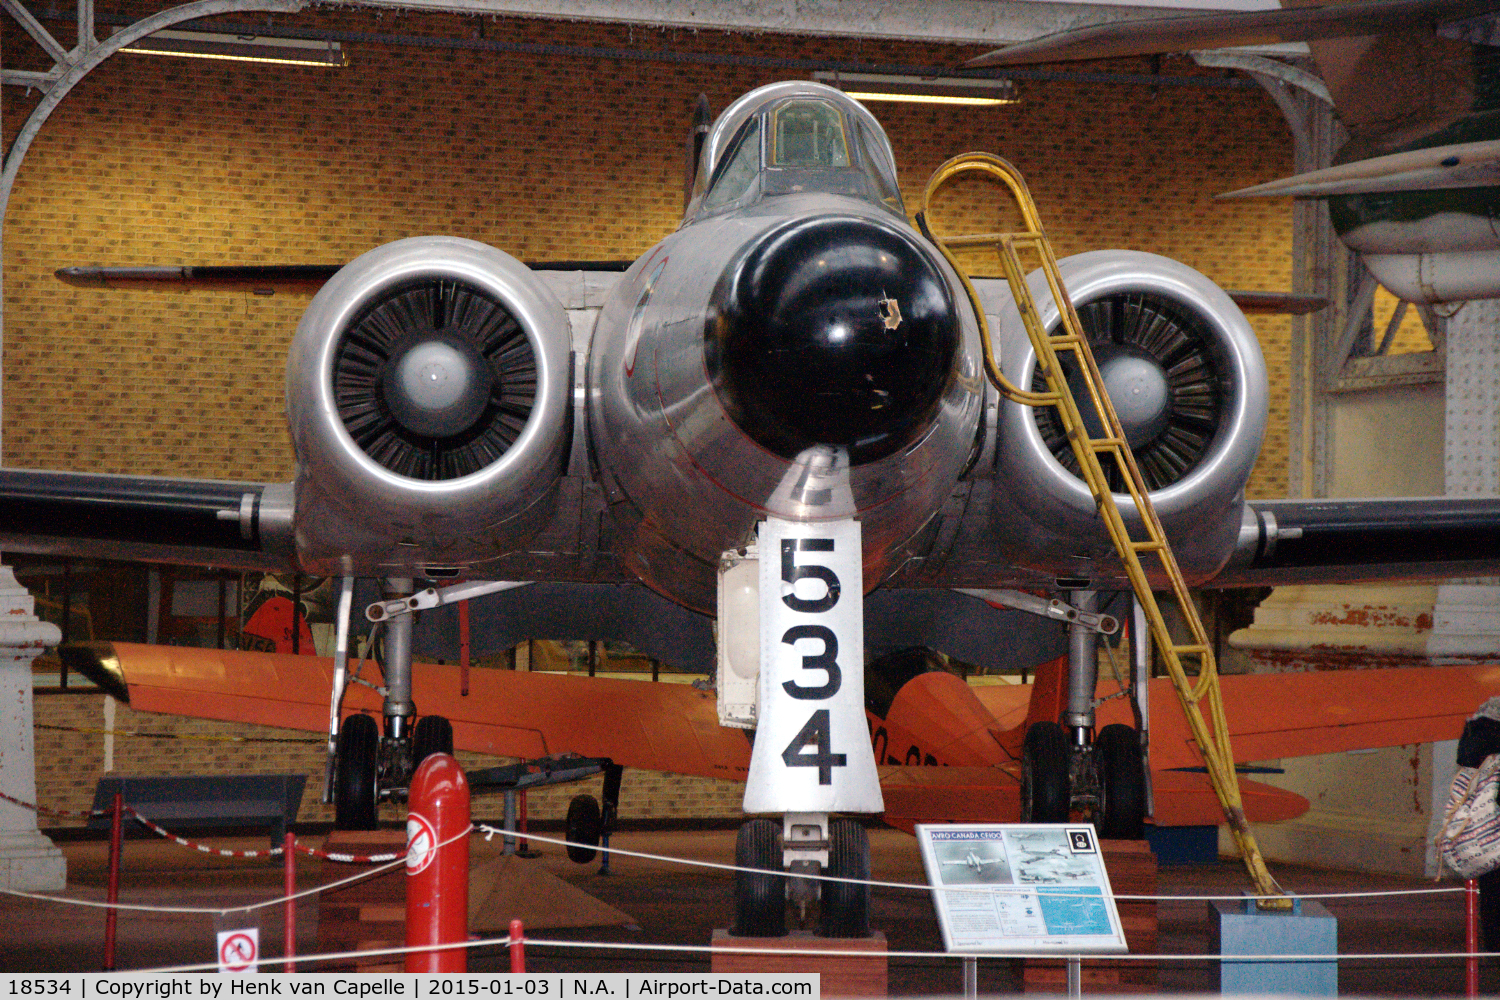 18534, Avro Canada CF-100 Mk.5 Canuck C/N 434, Frontal view of the Avro Canada CF-100 preserved in the Army Museum in Brussel, Belgium.